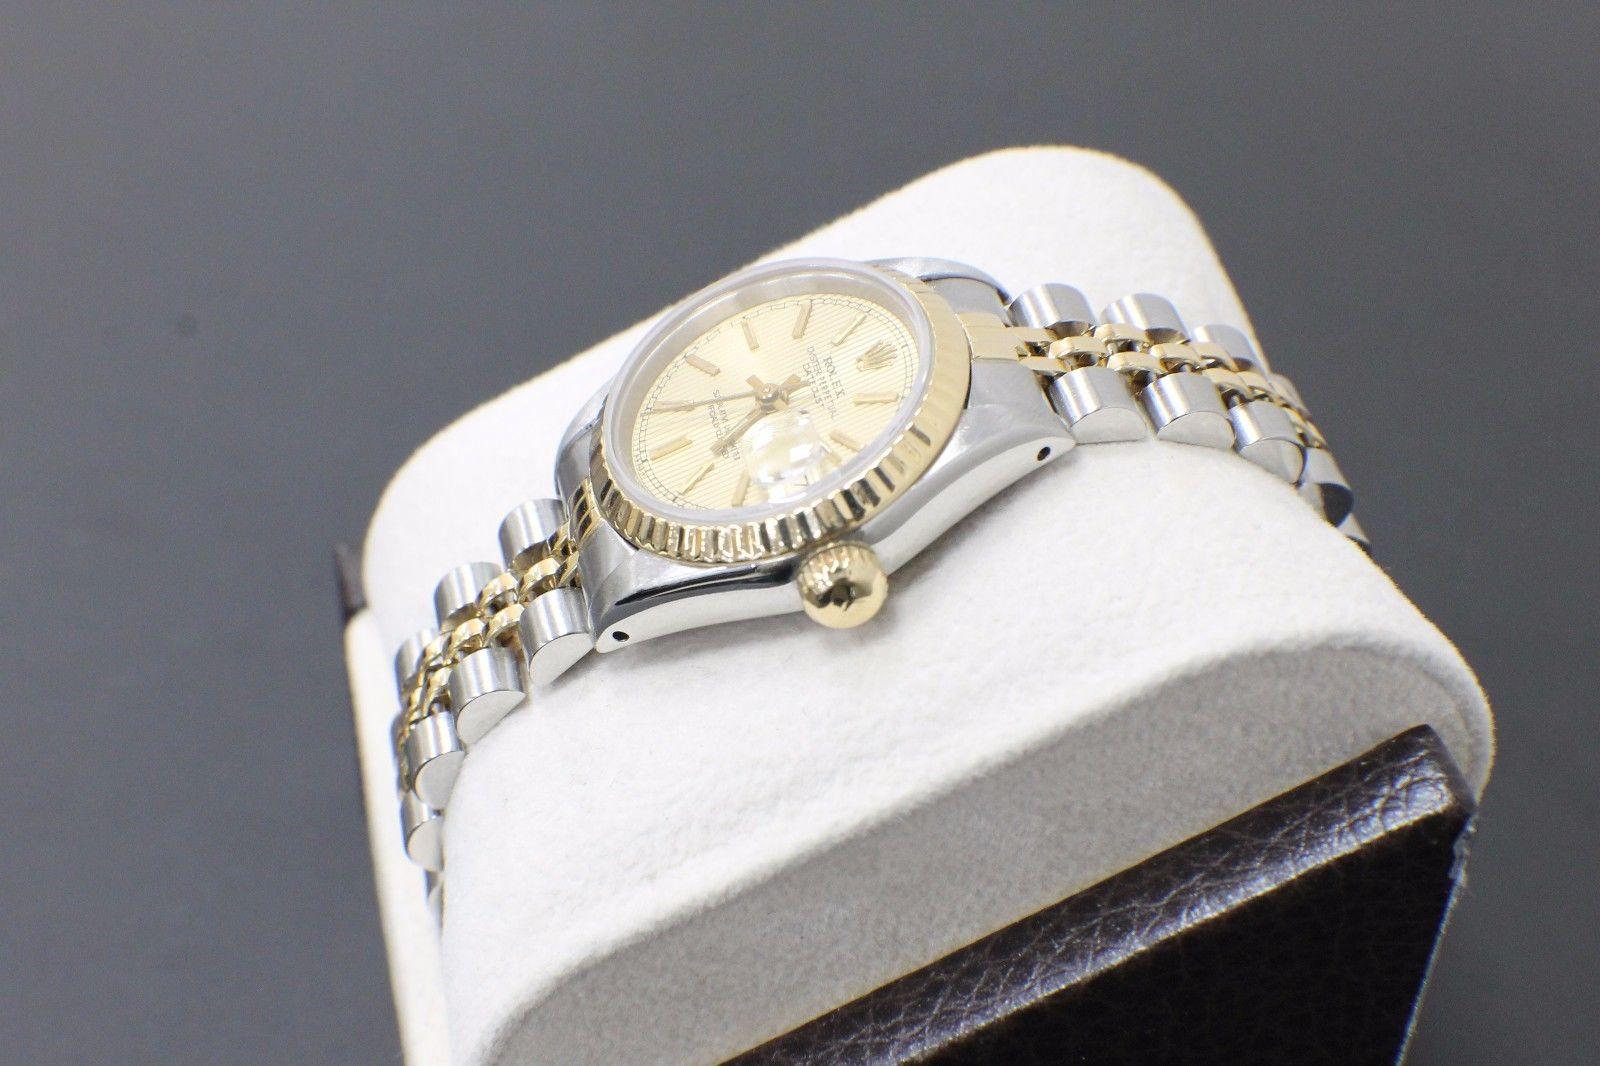 Style Number: 69173

Serial: 9227***

Model: Datejust

Case: Stainless Steel

Band: 18K Yellow Gold & Stainless Steel

Bezel: 18K Yellow Gold

Dial: Champagne Tapestry

Face: Sapphire Crystal

Case Size: 26mm

Includes: 

-Rolex Box & Papers

-6